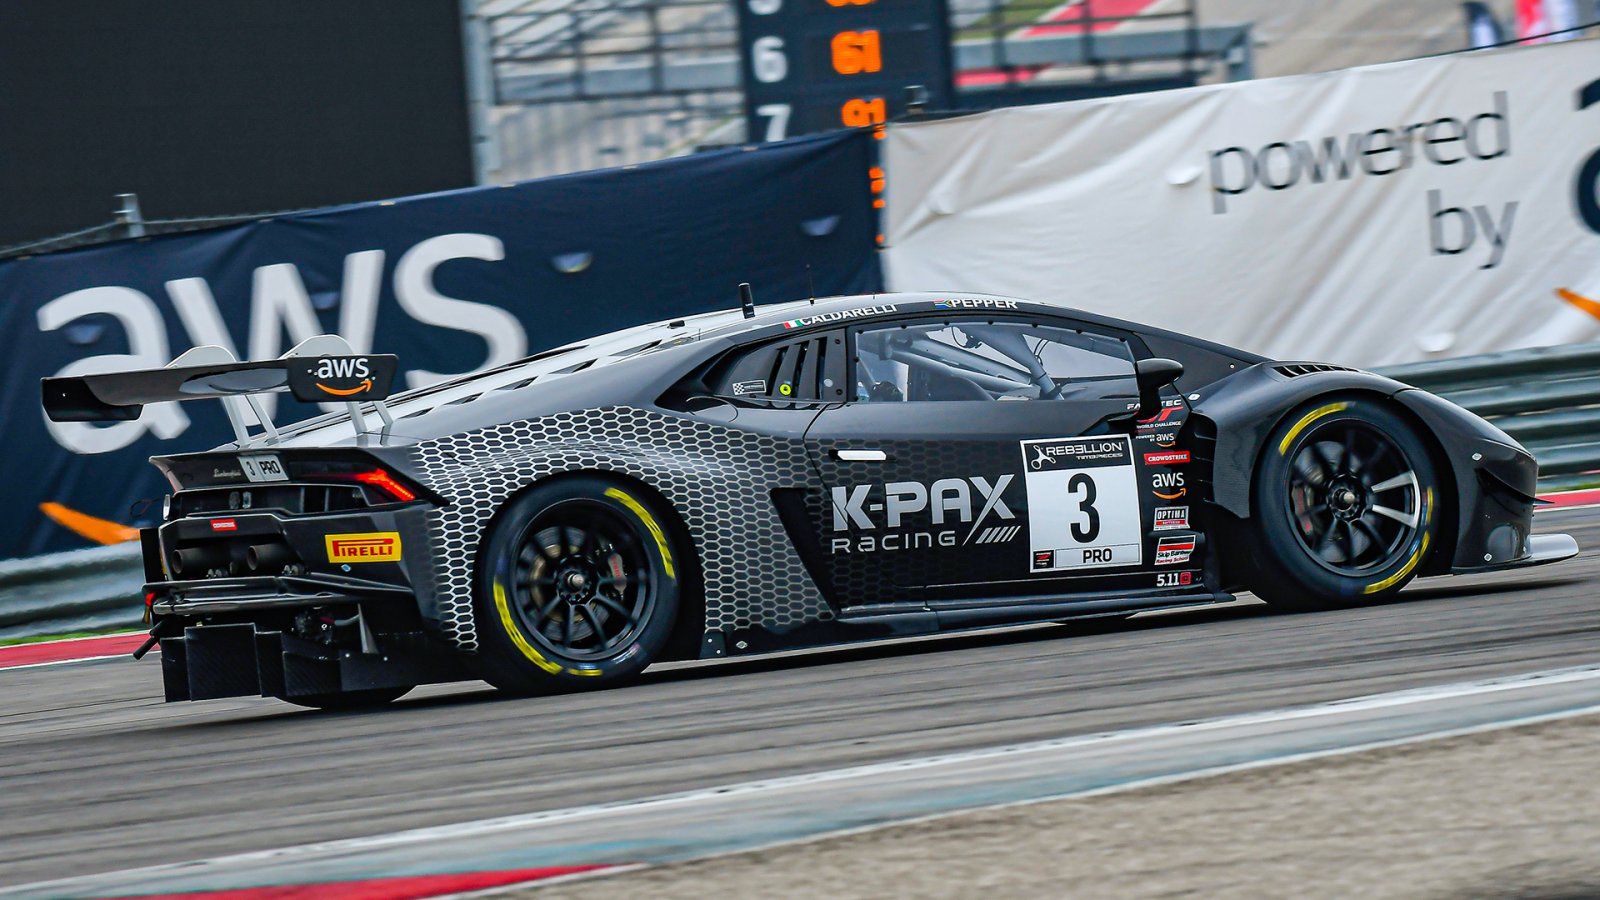 Lamborghini Locks Out Race 1, Battles Mercedes-AMG In Race 2 after Qualifying Sessions